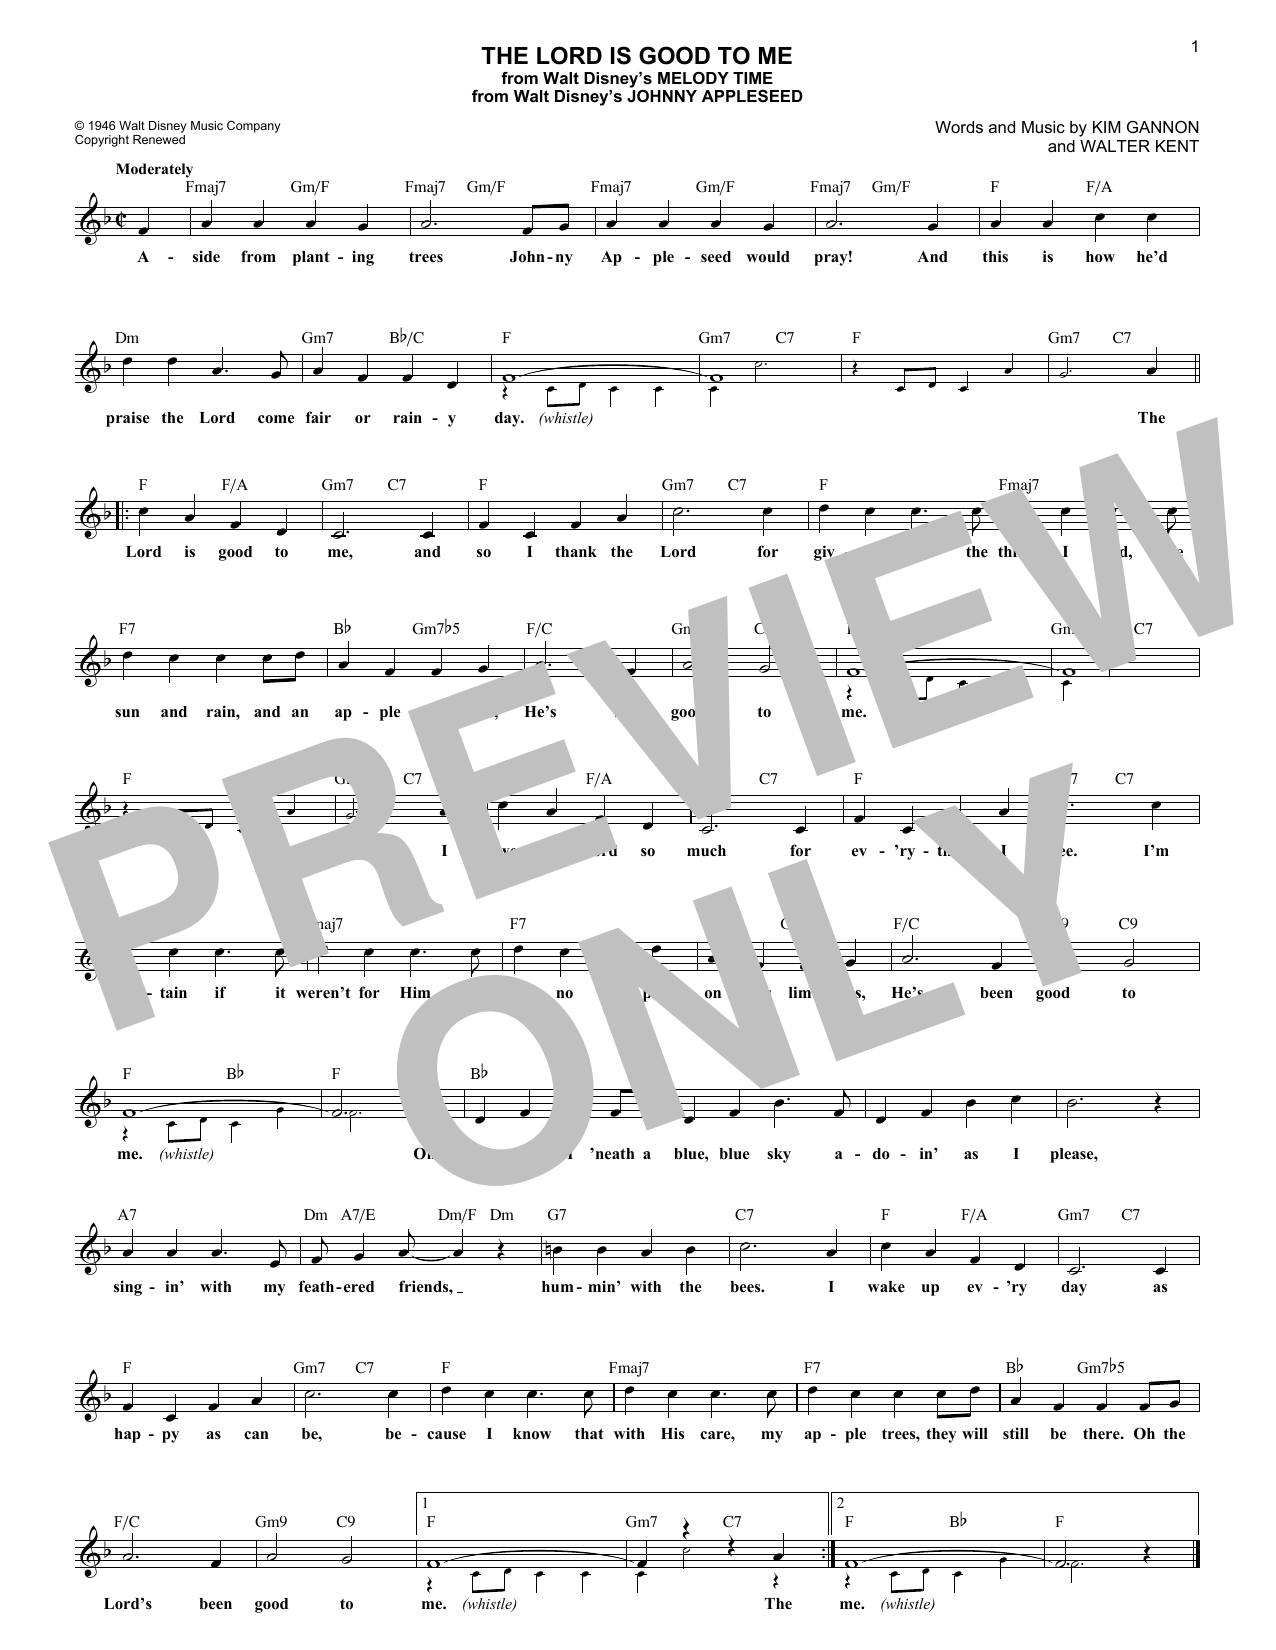 Download Walter Kent The Lord Is Good To Me Sheet Music